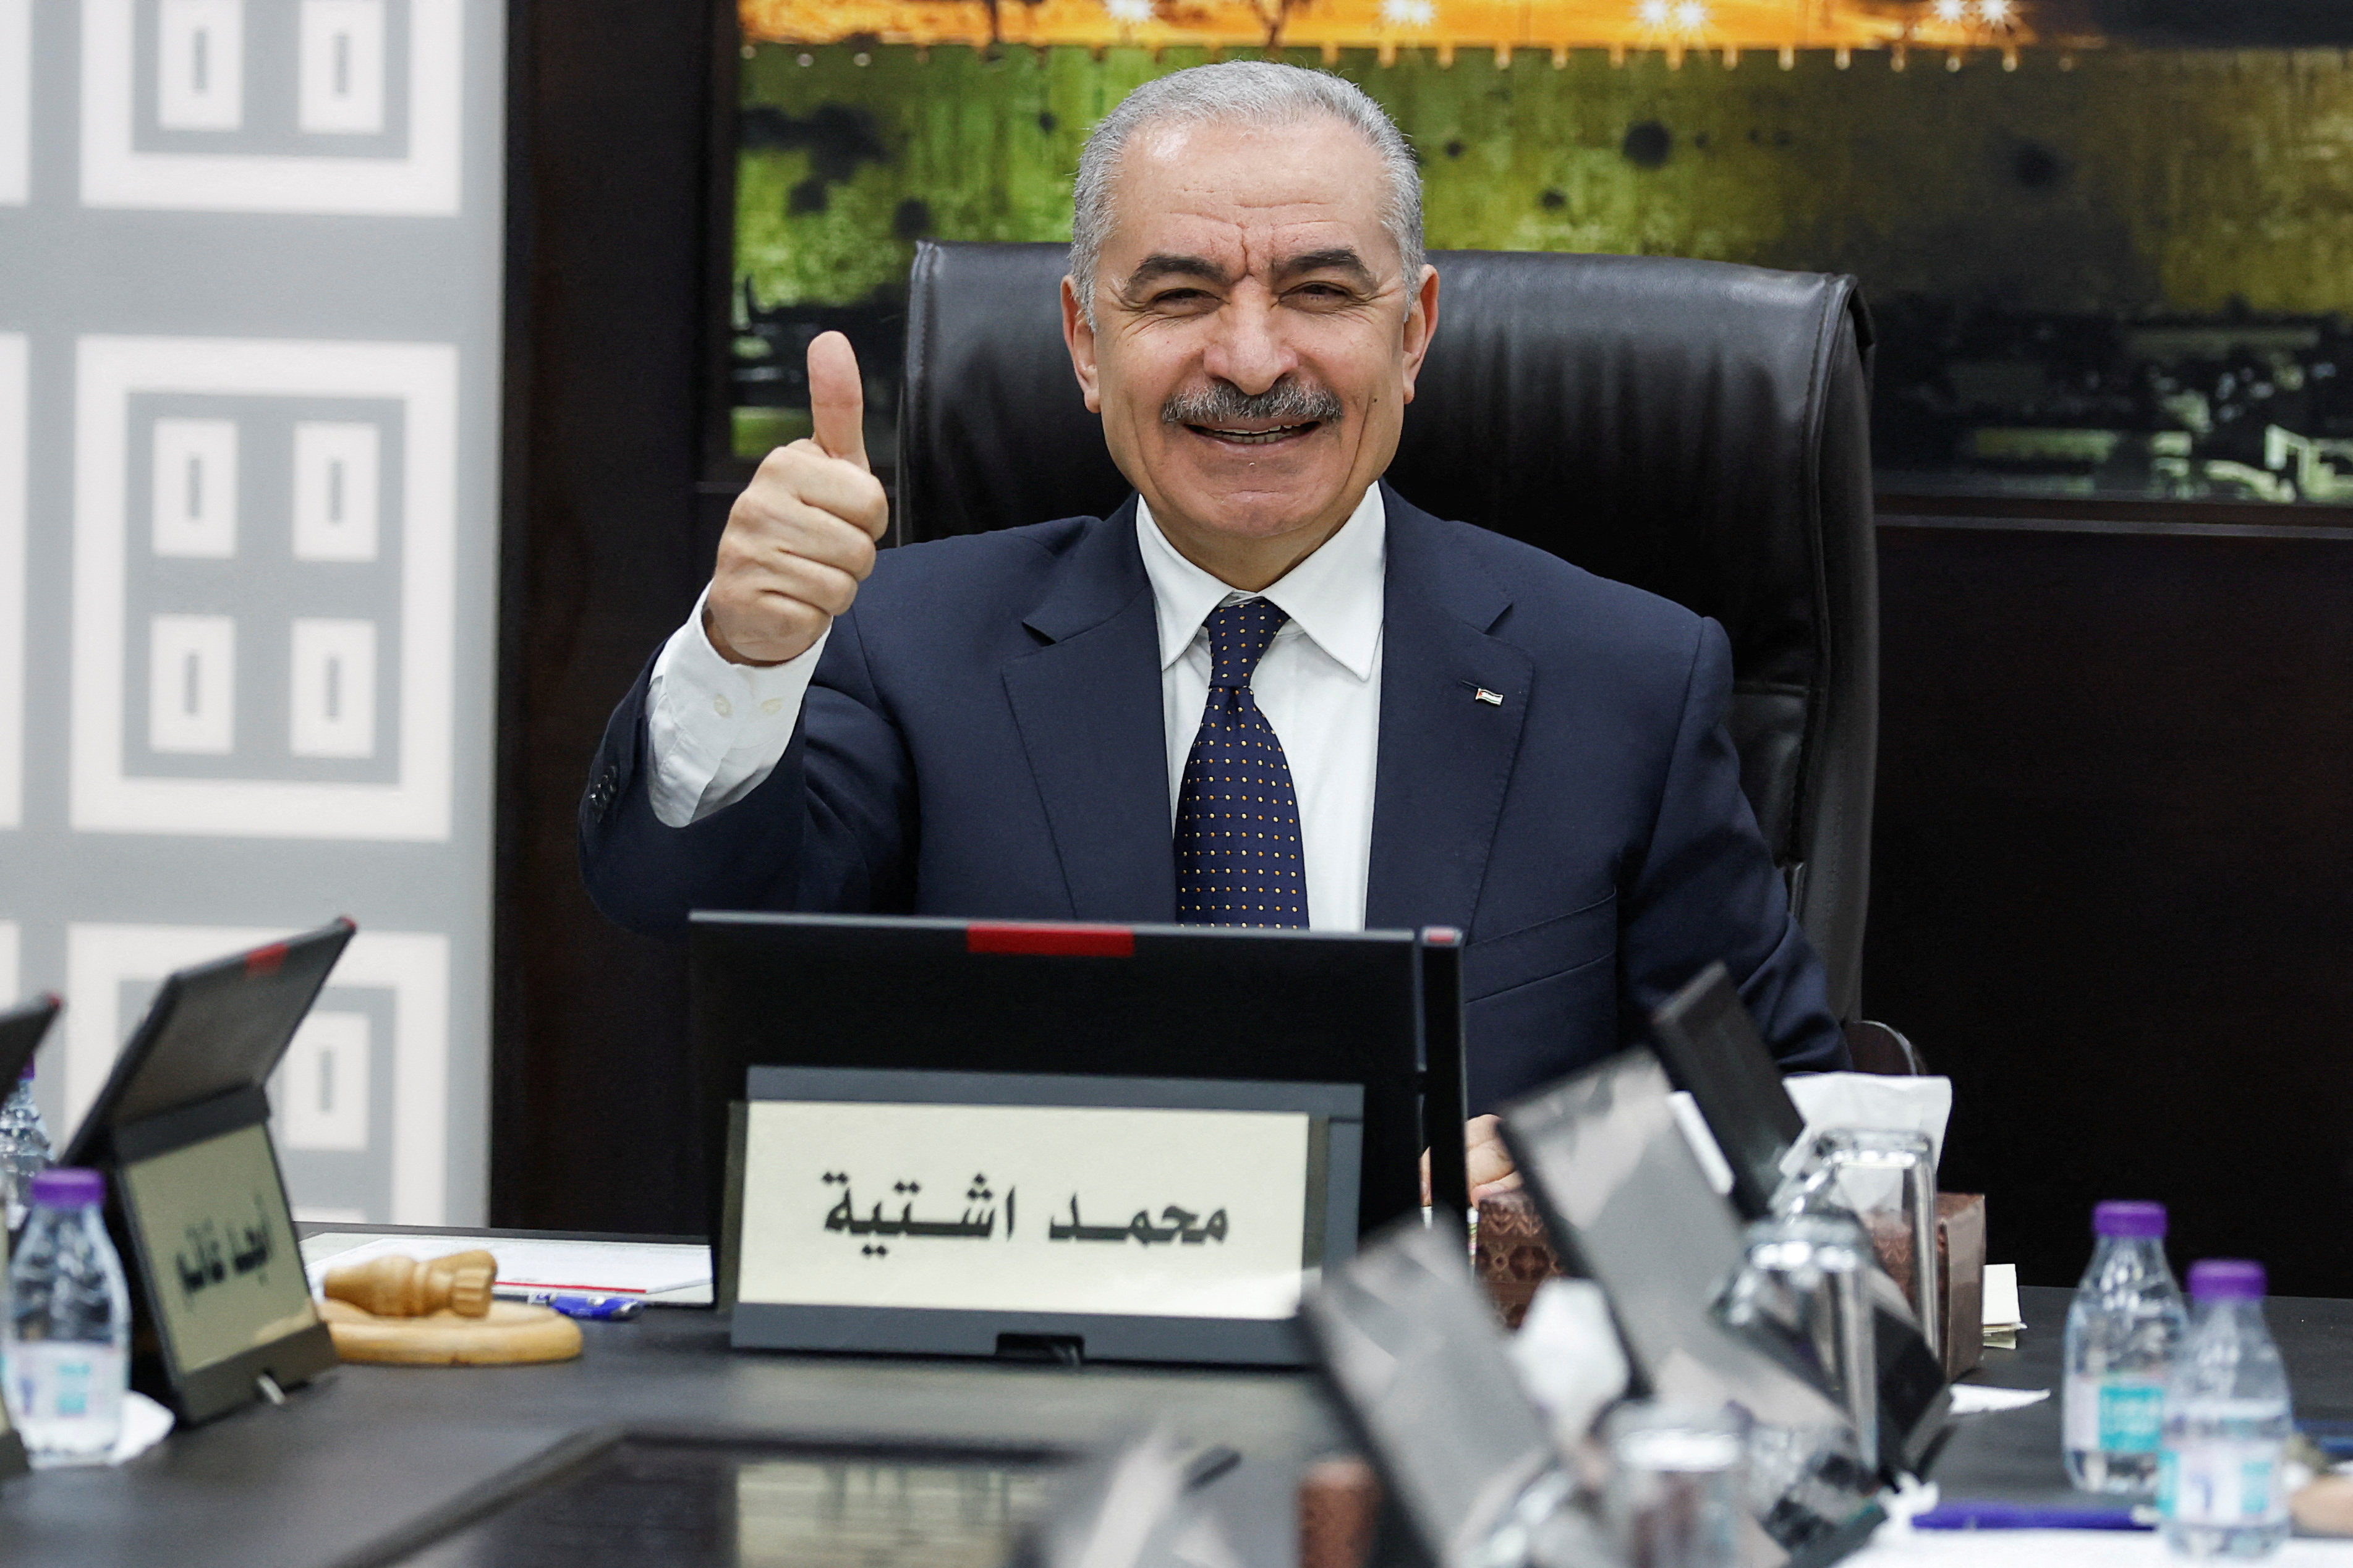 Palestinian Territories’ Prime Minister Mohammad Shtayyeh gestures as he convenes a cabinet meeting in Ramallah. Photo: Reuters